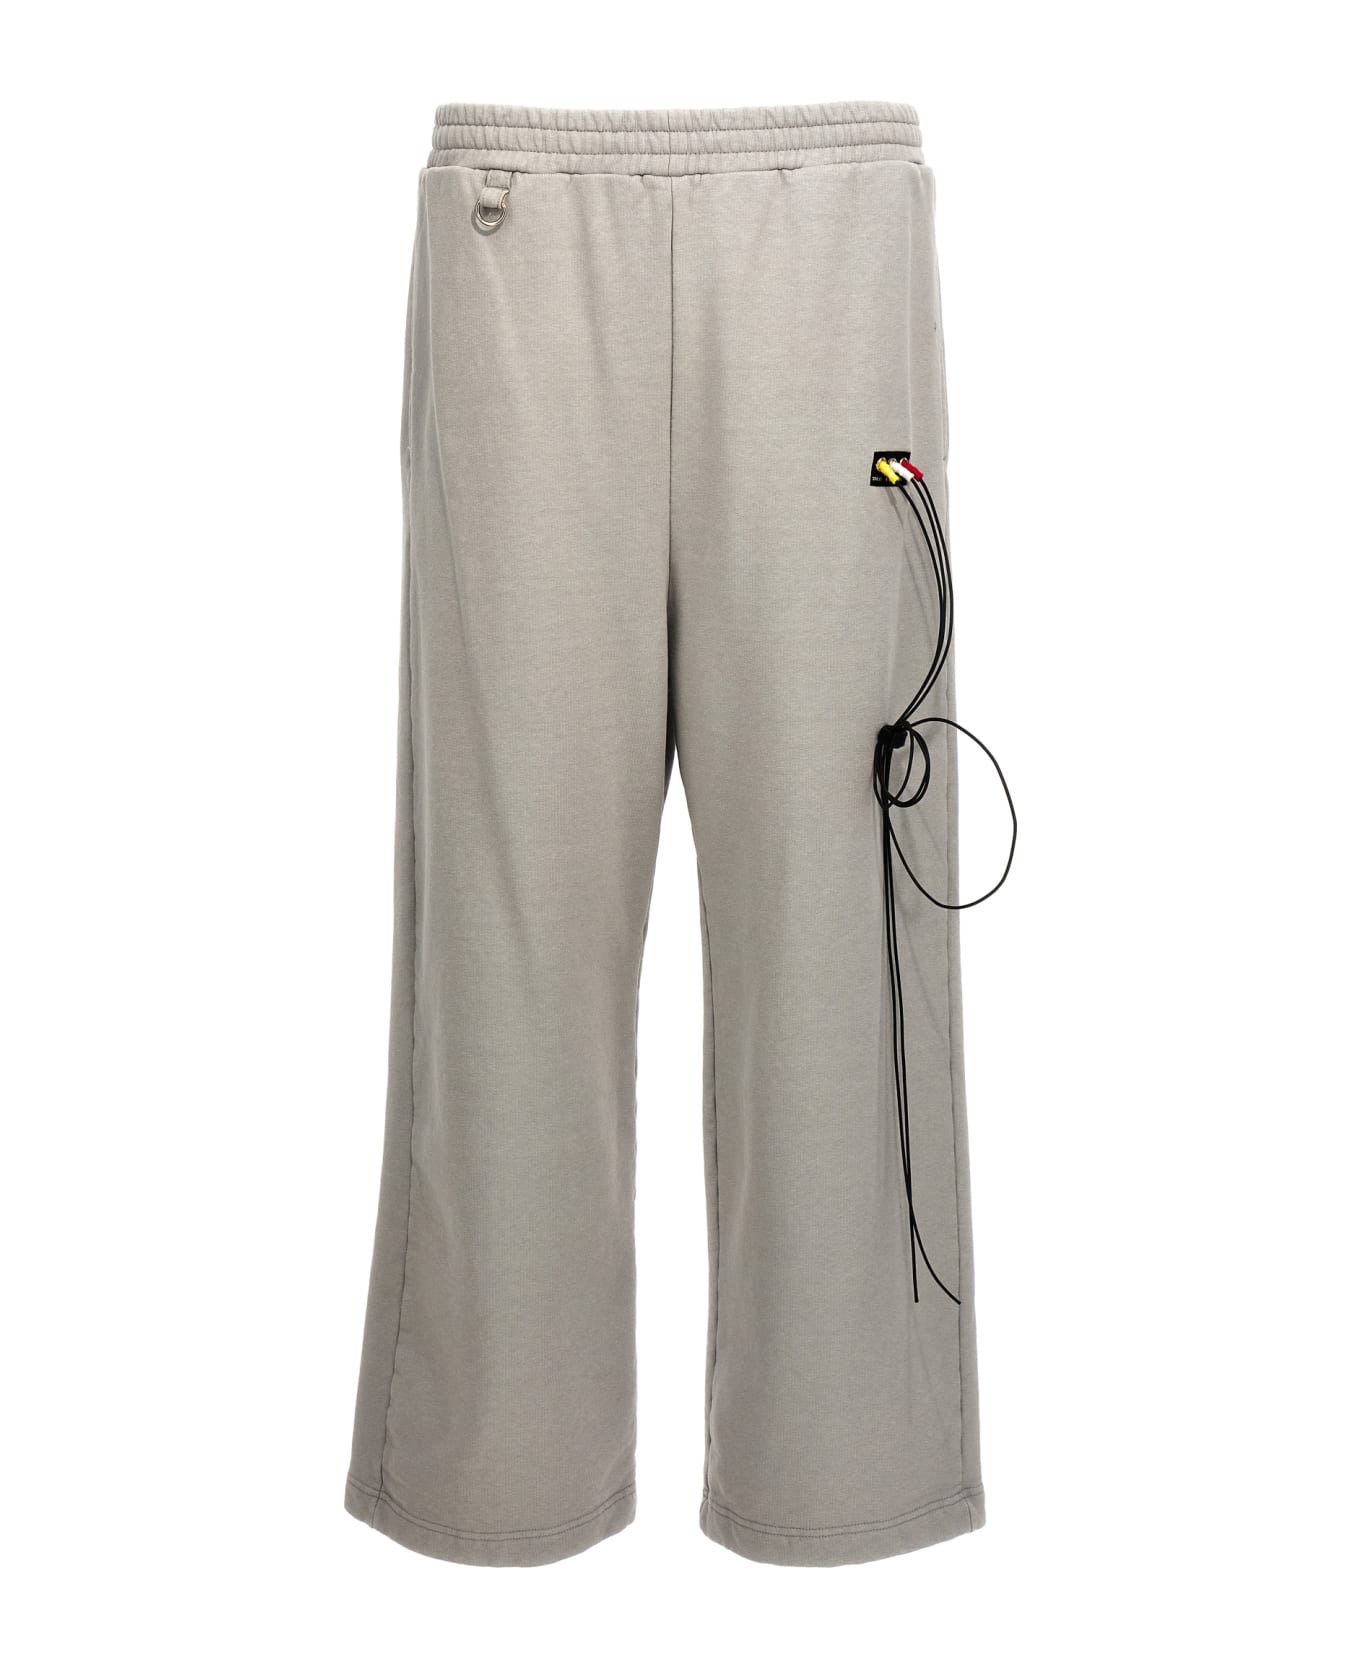 doublet 'rca Cable Embroidery' Joggers - Gray